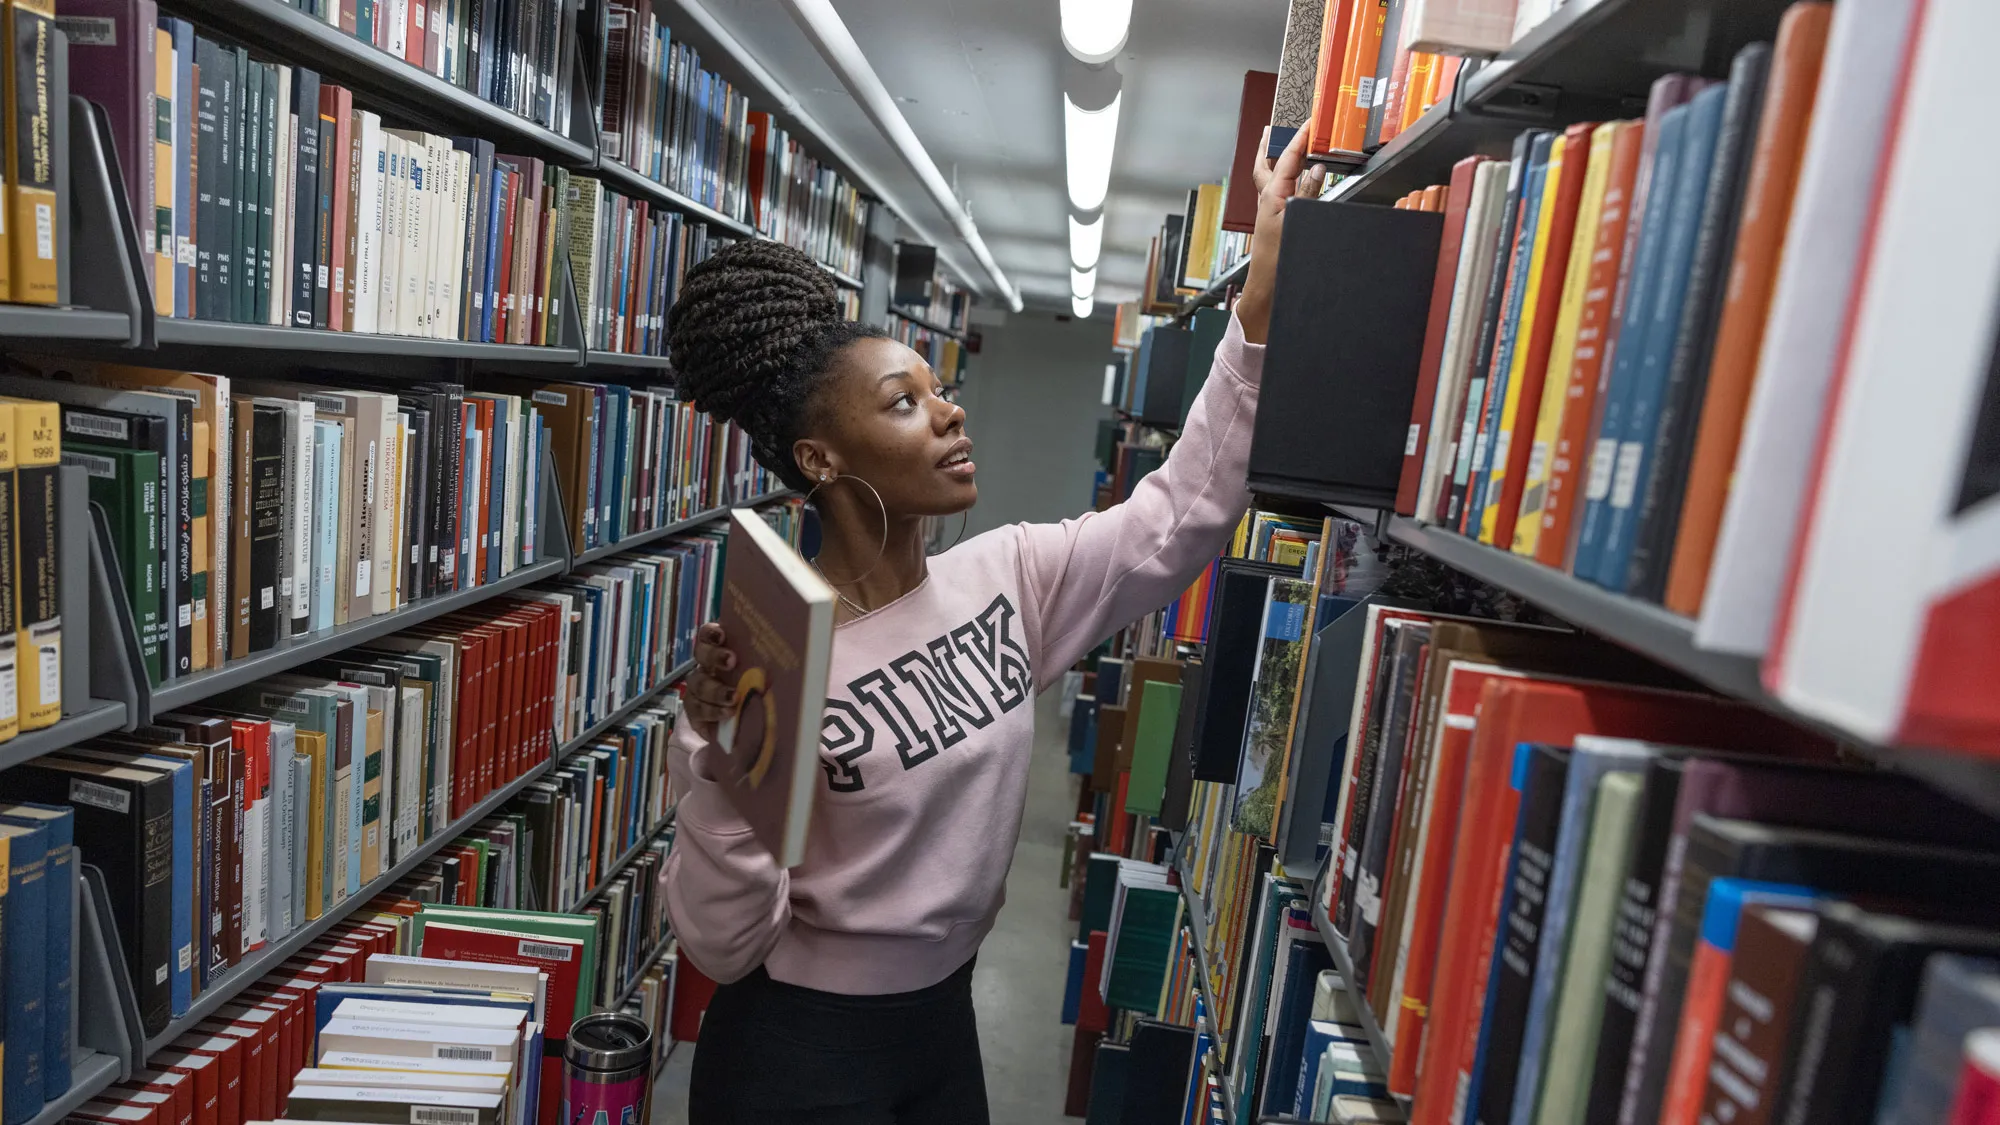 Deep in some of the stacks, a young Black woman, with her hair twisted into a tall stylish bun on top of her head, reaches above her head to shelf a large book. She holds another in her other hand and, though frozen in this moment by the photo, appears graceful in doing her work. Her sweatshirt says “pink” in big capital letters. 